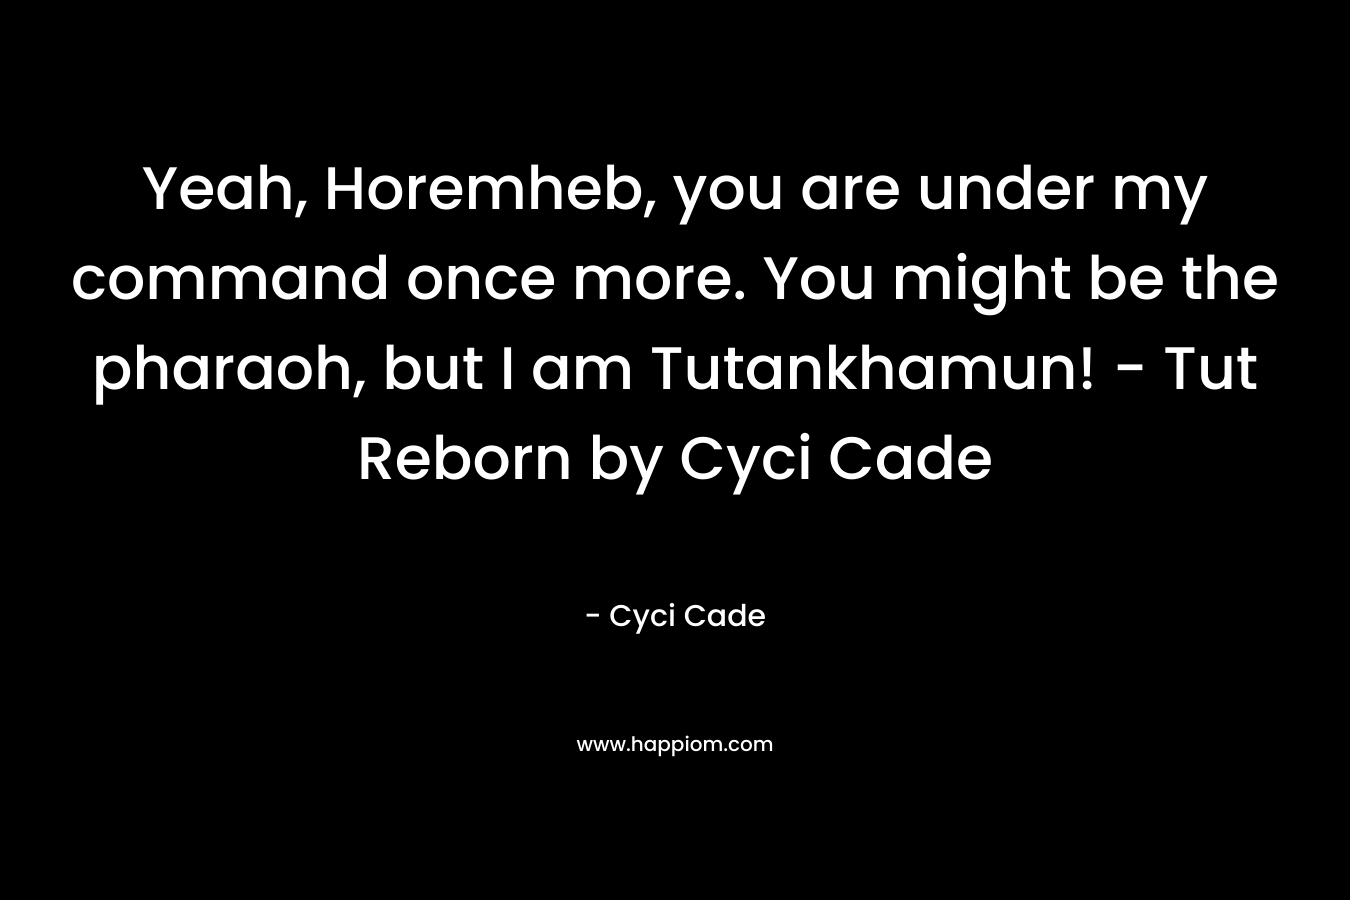 Yeah, Horemheb, you are under my command once more. You might be the pharaoh, but I am Tutankhamun! - Tut Reborn by Cyci Cade